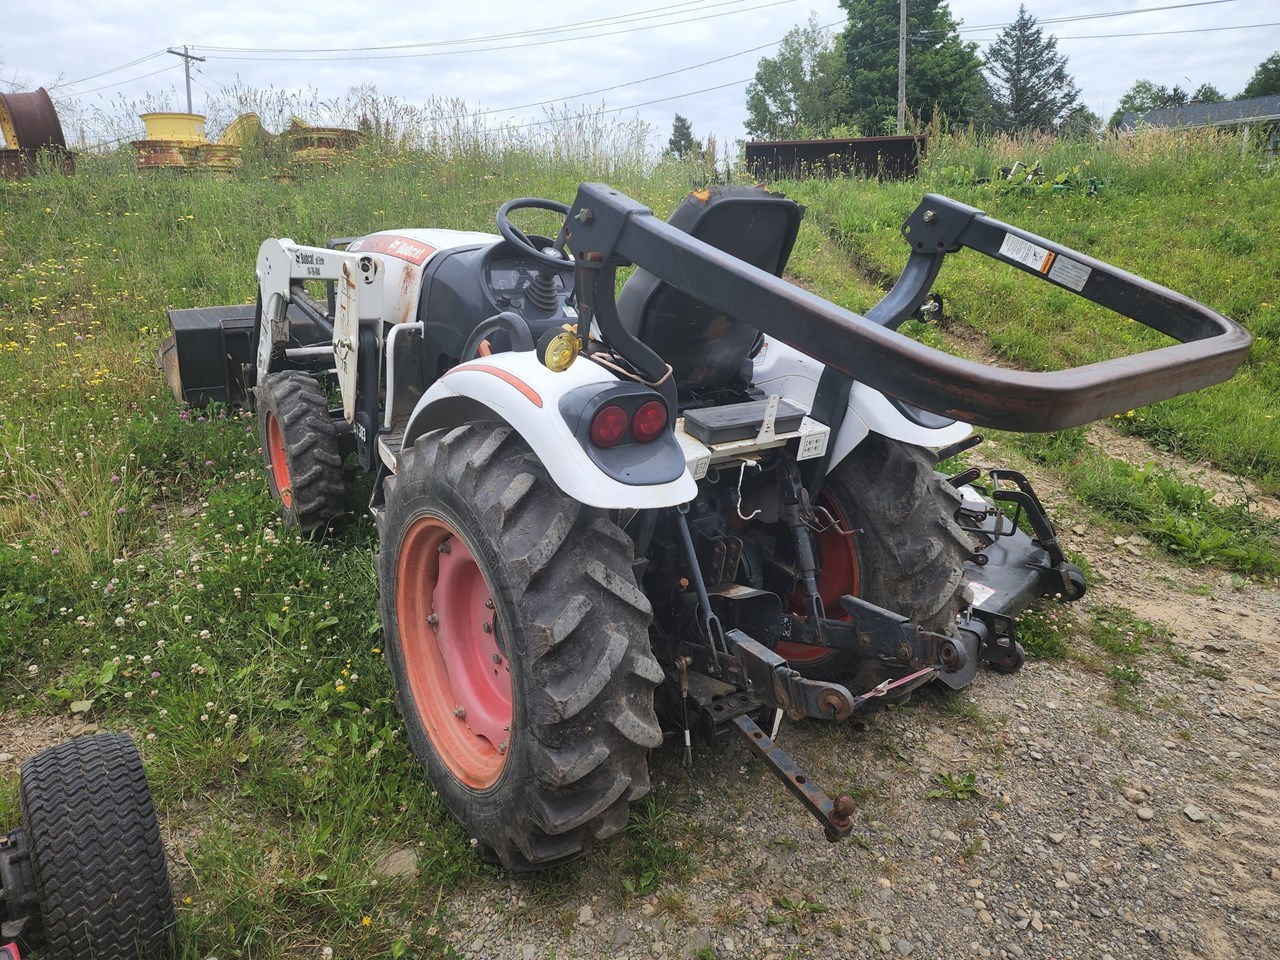 2014 Bobcat Ct225 Tractor - Compact Utility For Sale